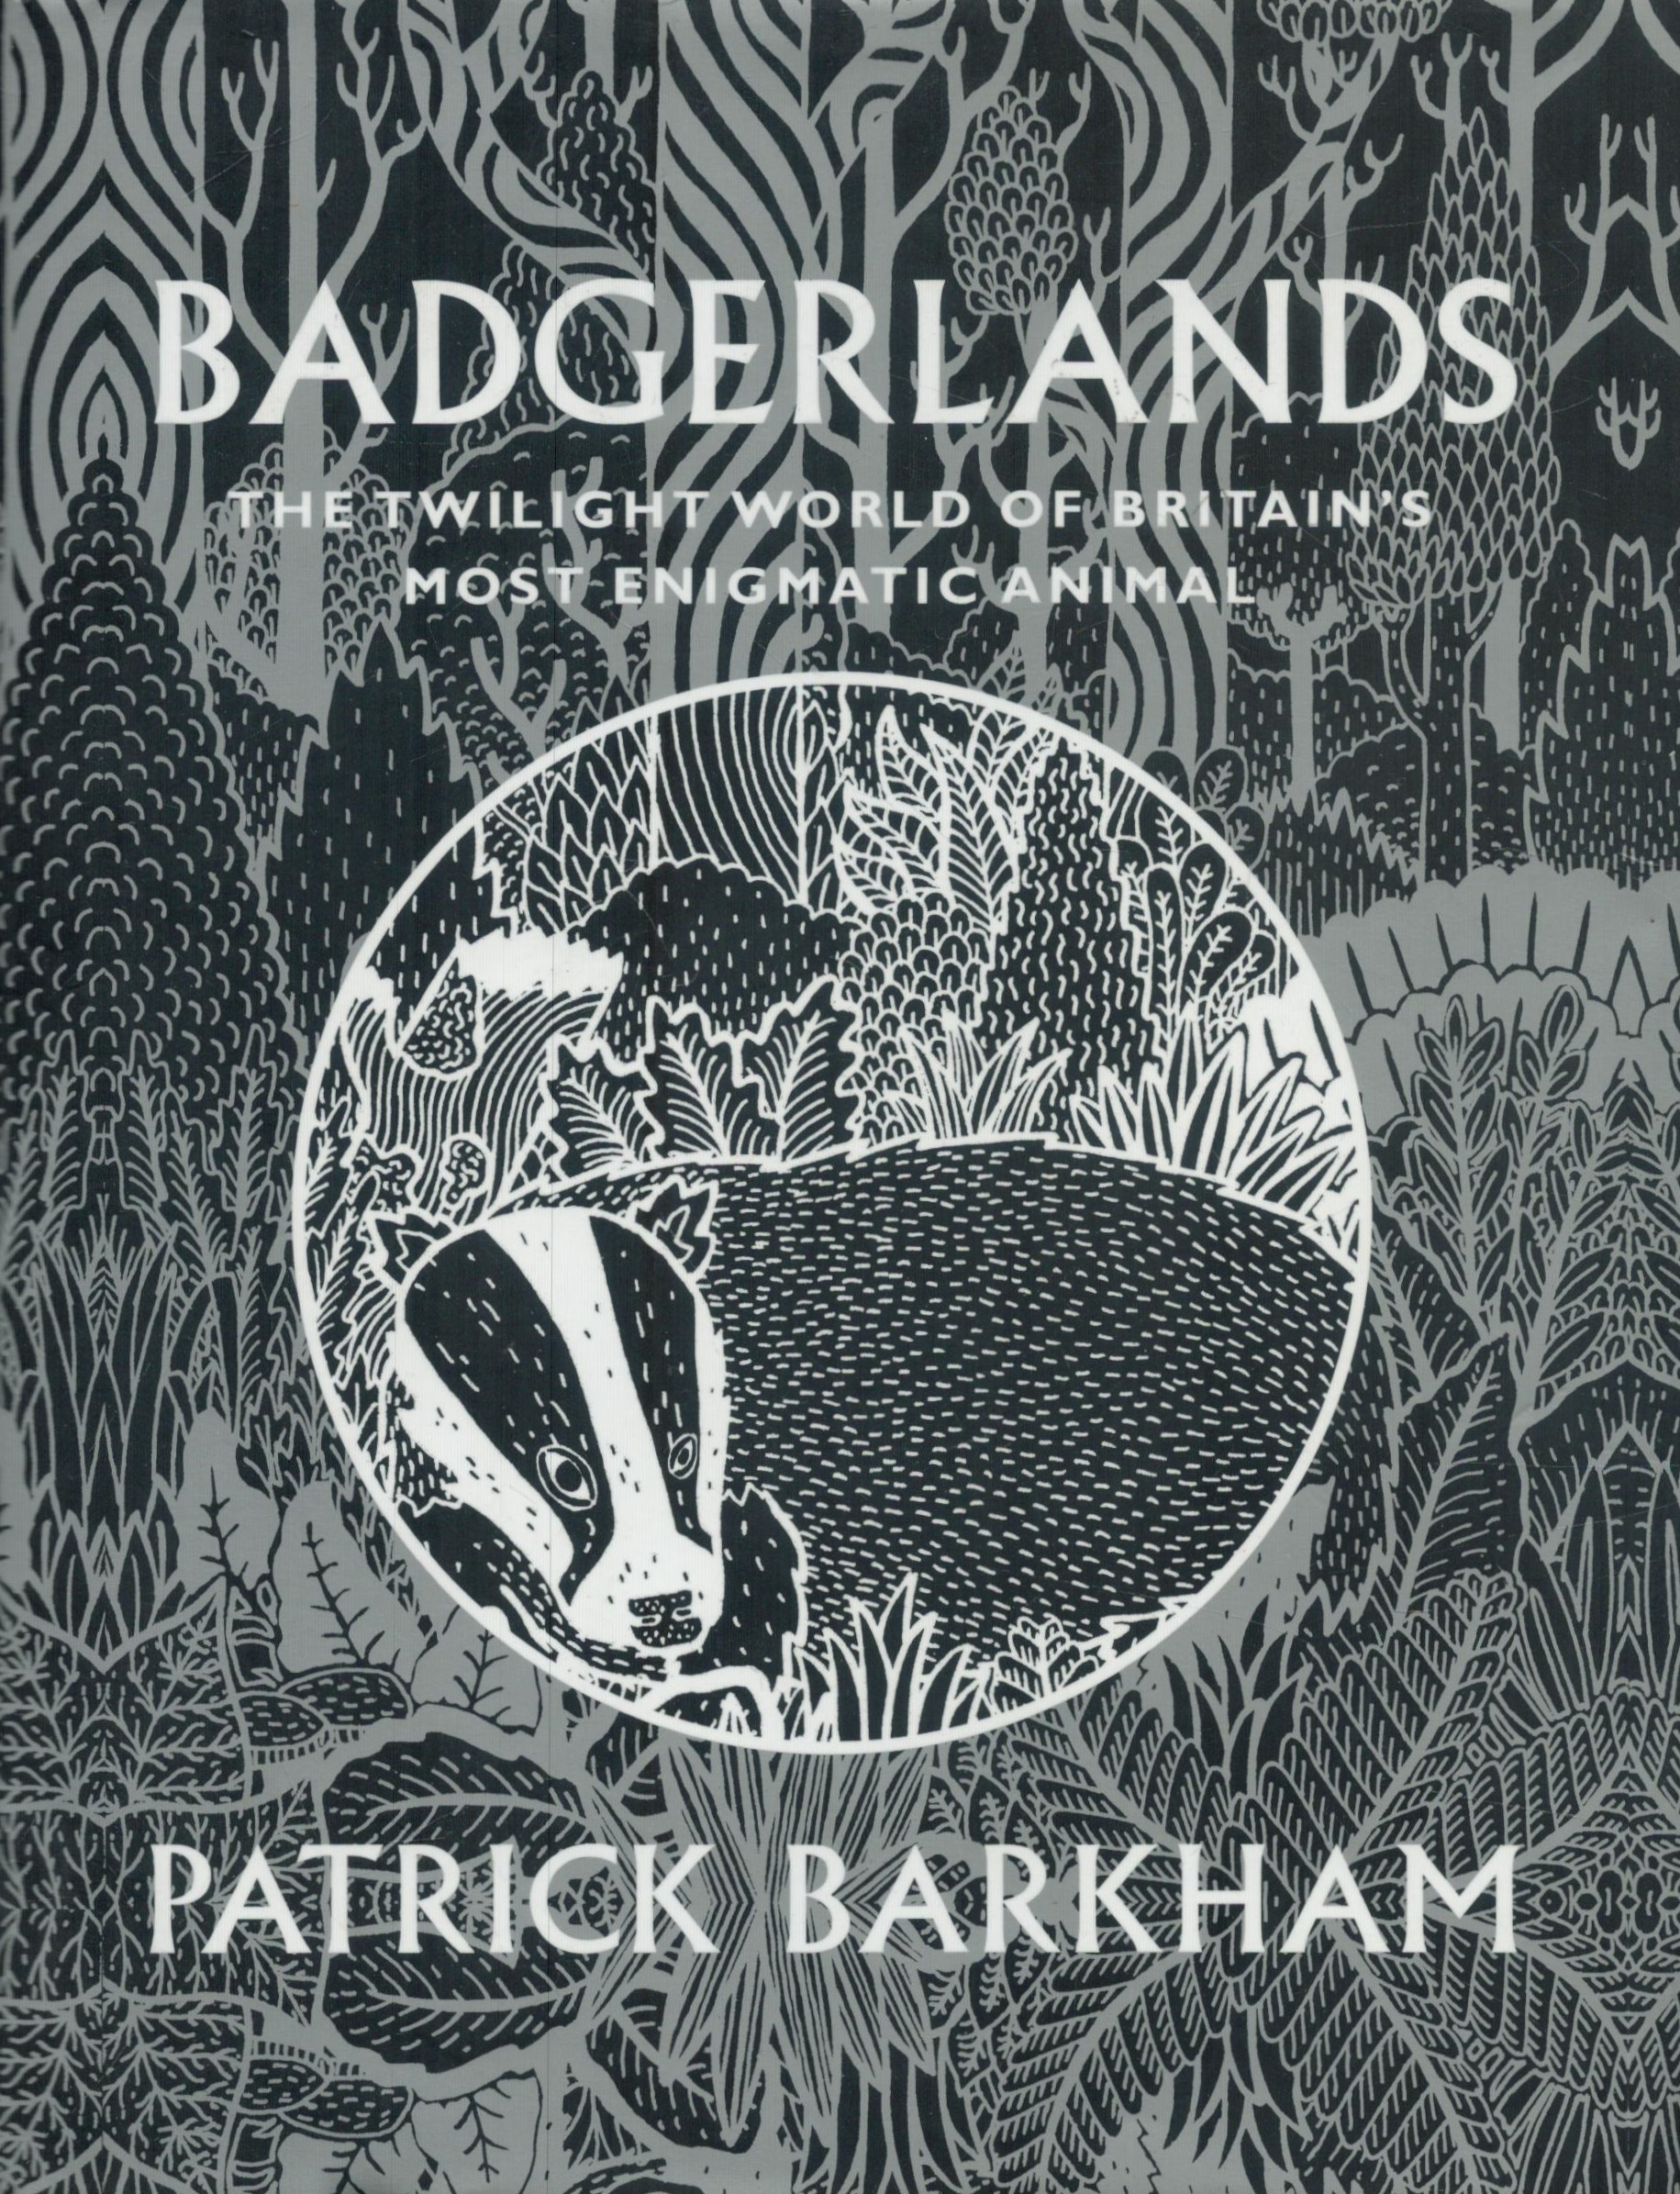 Patrick Barkham Signed Book - Badgerlands - The Twilight World of Britain's most Enigmatic Animal by